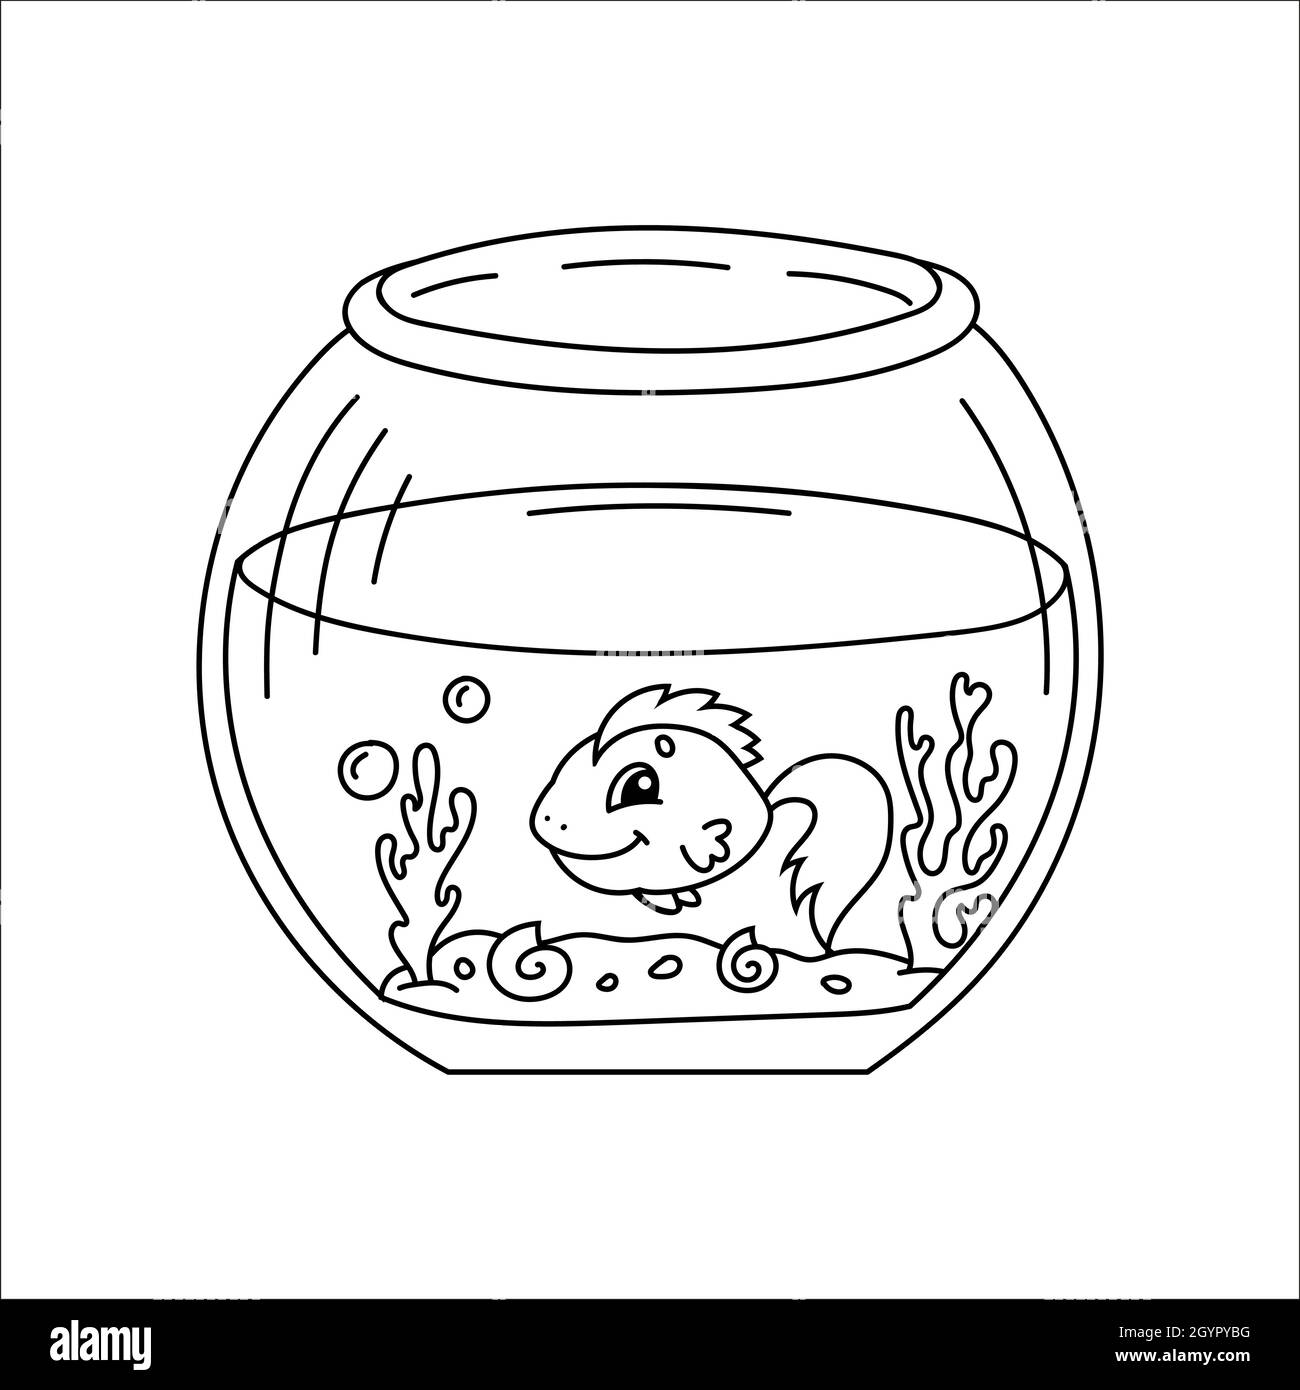 Aquarium with fish. Coloring book page for kids. Cartoon style ...